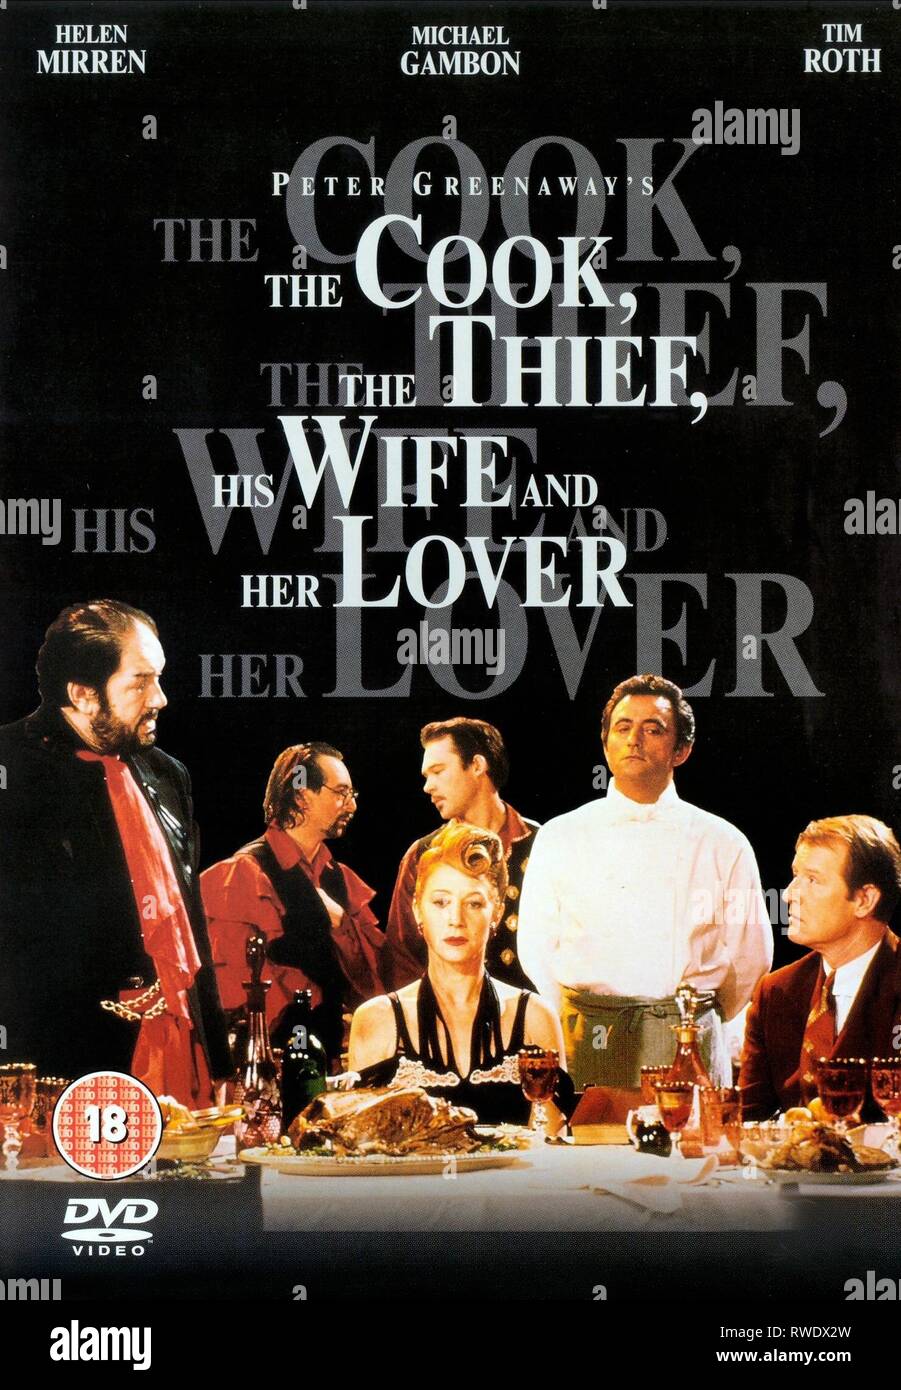 MICHAEL GAMBON, RON COOK, EWAN STEWART, HELEN MIRREN, RICHARD BOHRINGER,ALAN HOWARD MOVIE POSTER, THE COOK  THE THIEF  HIS WIFE and HER LOVER, 1989 Stock Photo